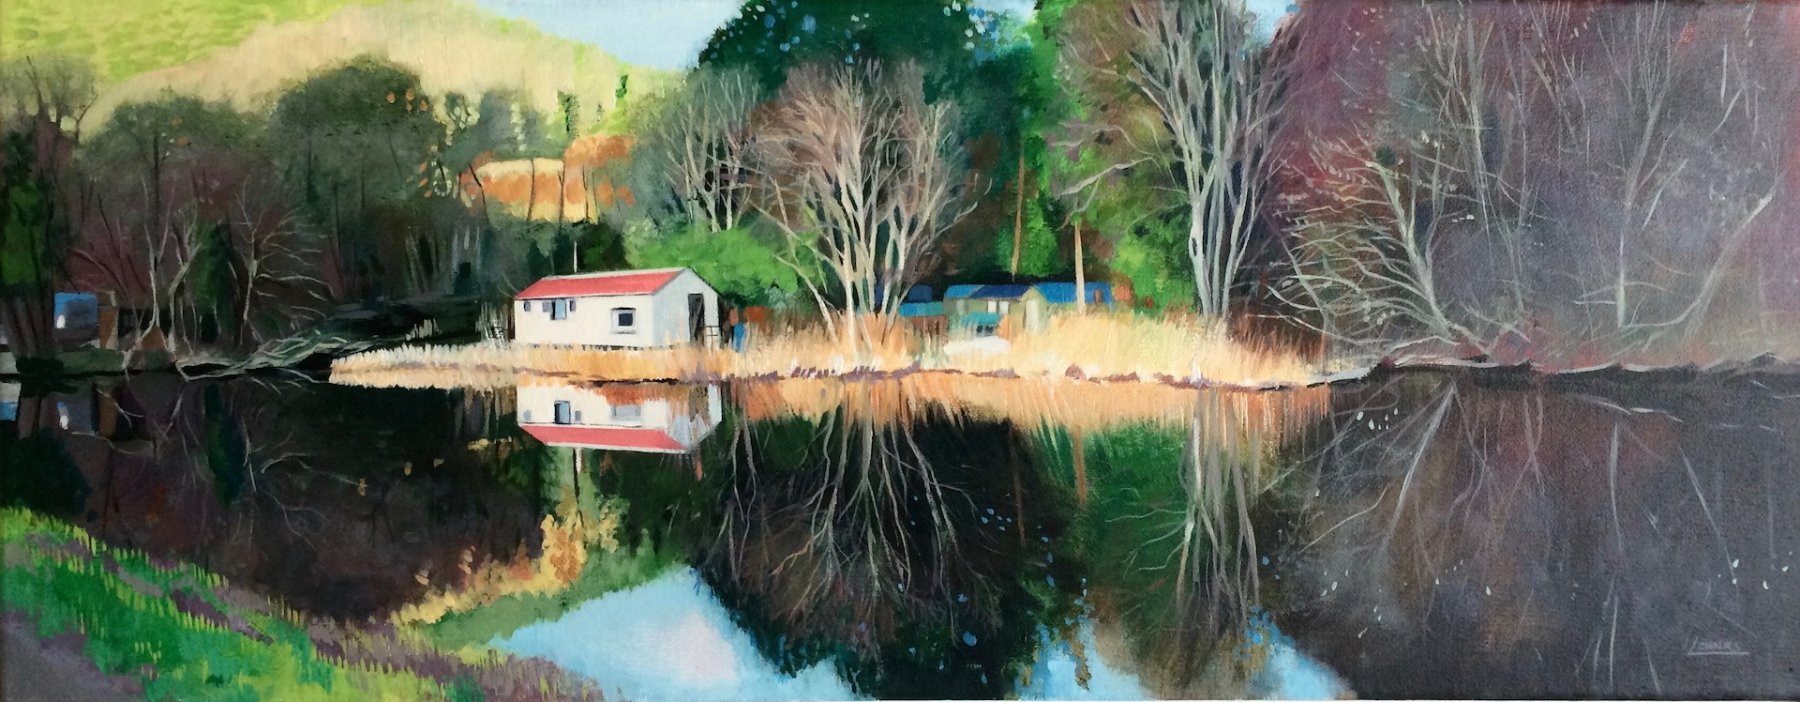 Red Roof Reflections - Lesley Banks